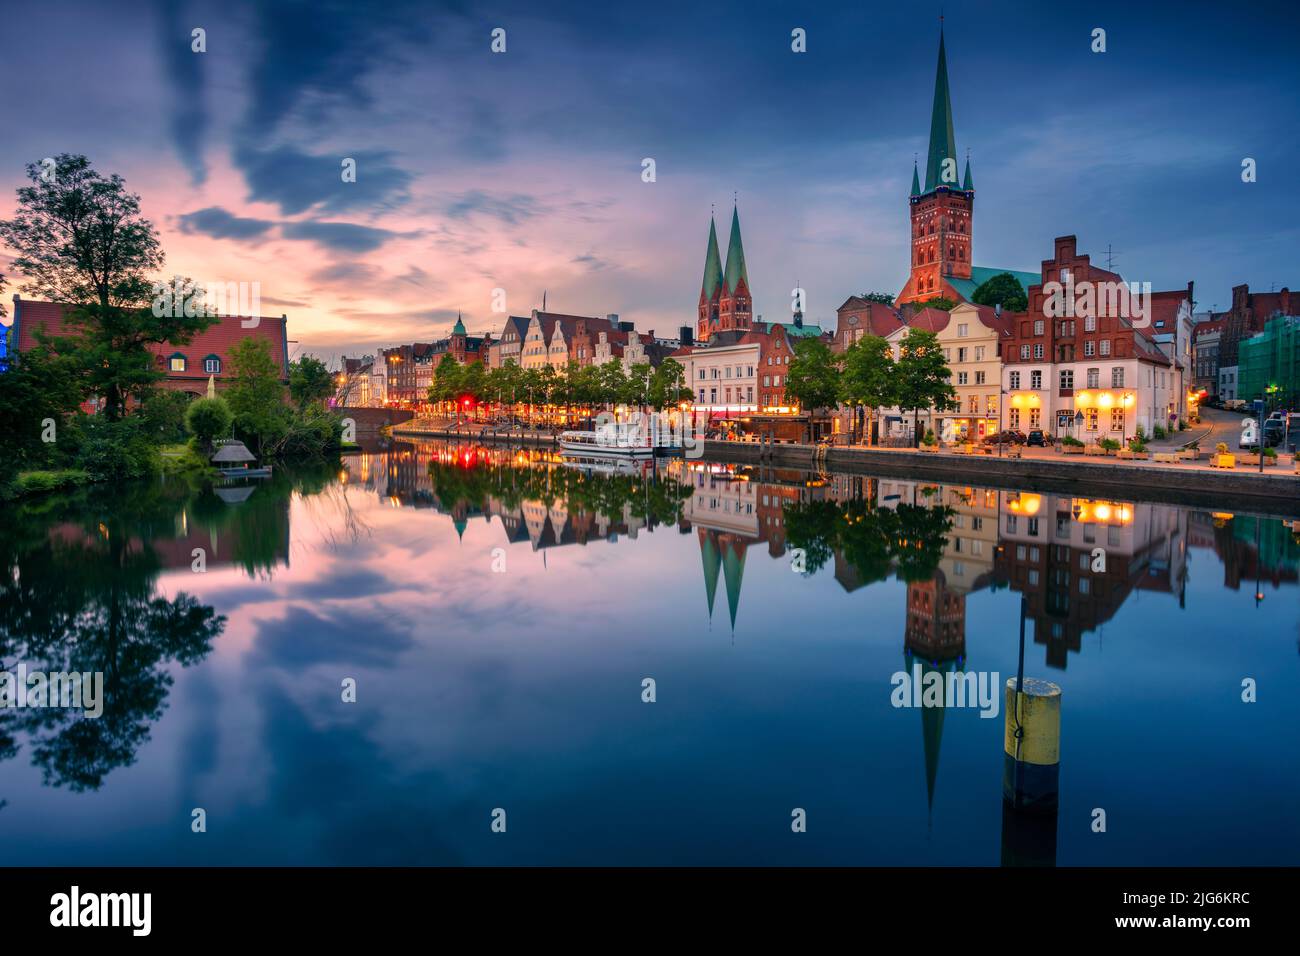 Lubeck, Germany. Cityscape image of riverside Lubeck  with reflection of the city in Trave River at sunset. Stock Photo